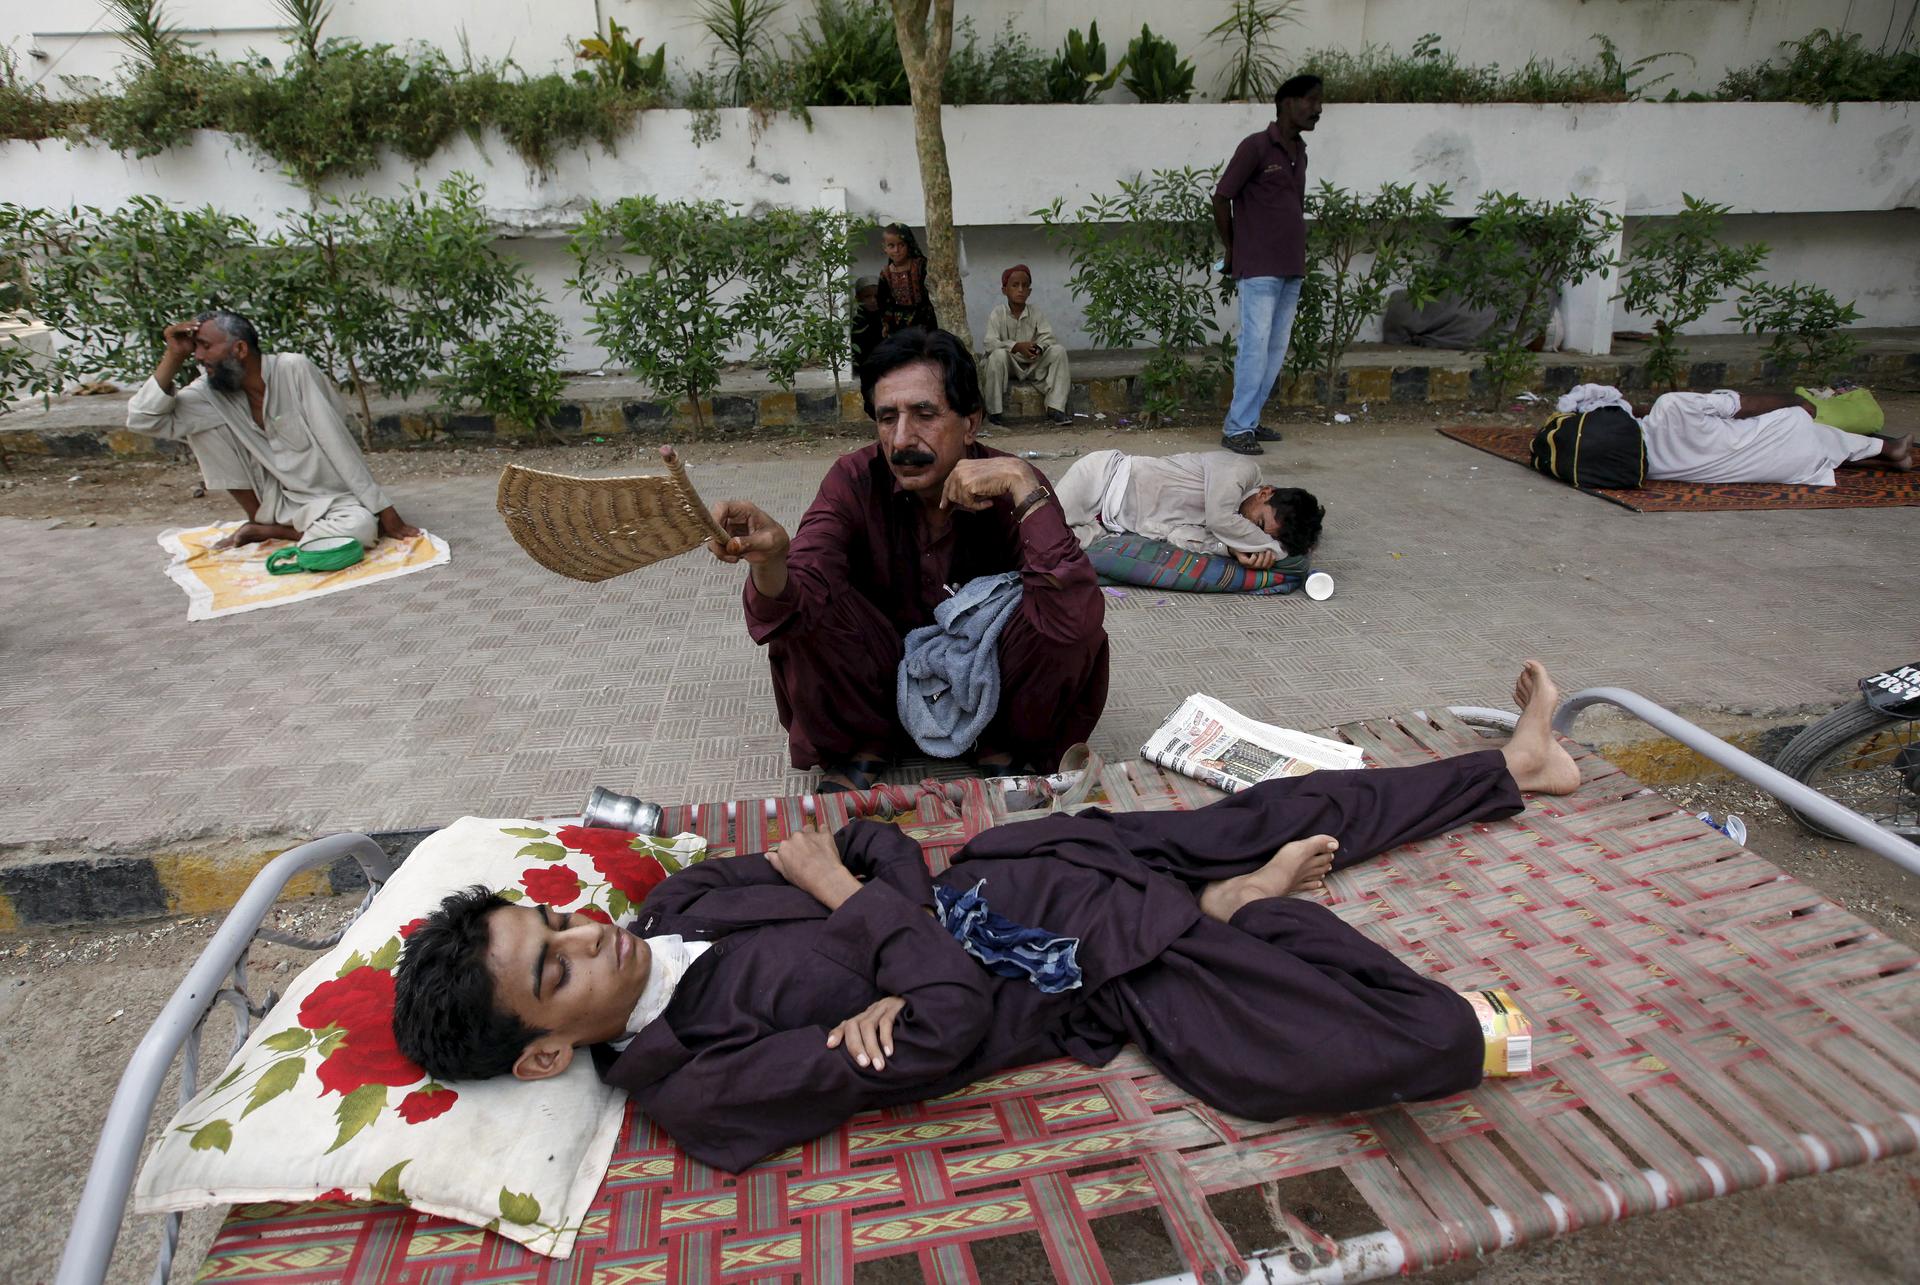 A man uses a hand-held fan to cool down his son, while waiting for their turn for a medical checkup, outside Jinnah Postgraduate Medical Centre (JPMC) during intense hot weather in Karachi, Pakistan, June 23, 2015.